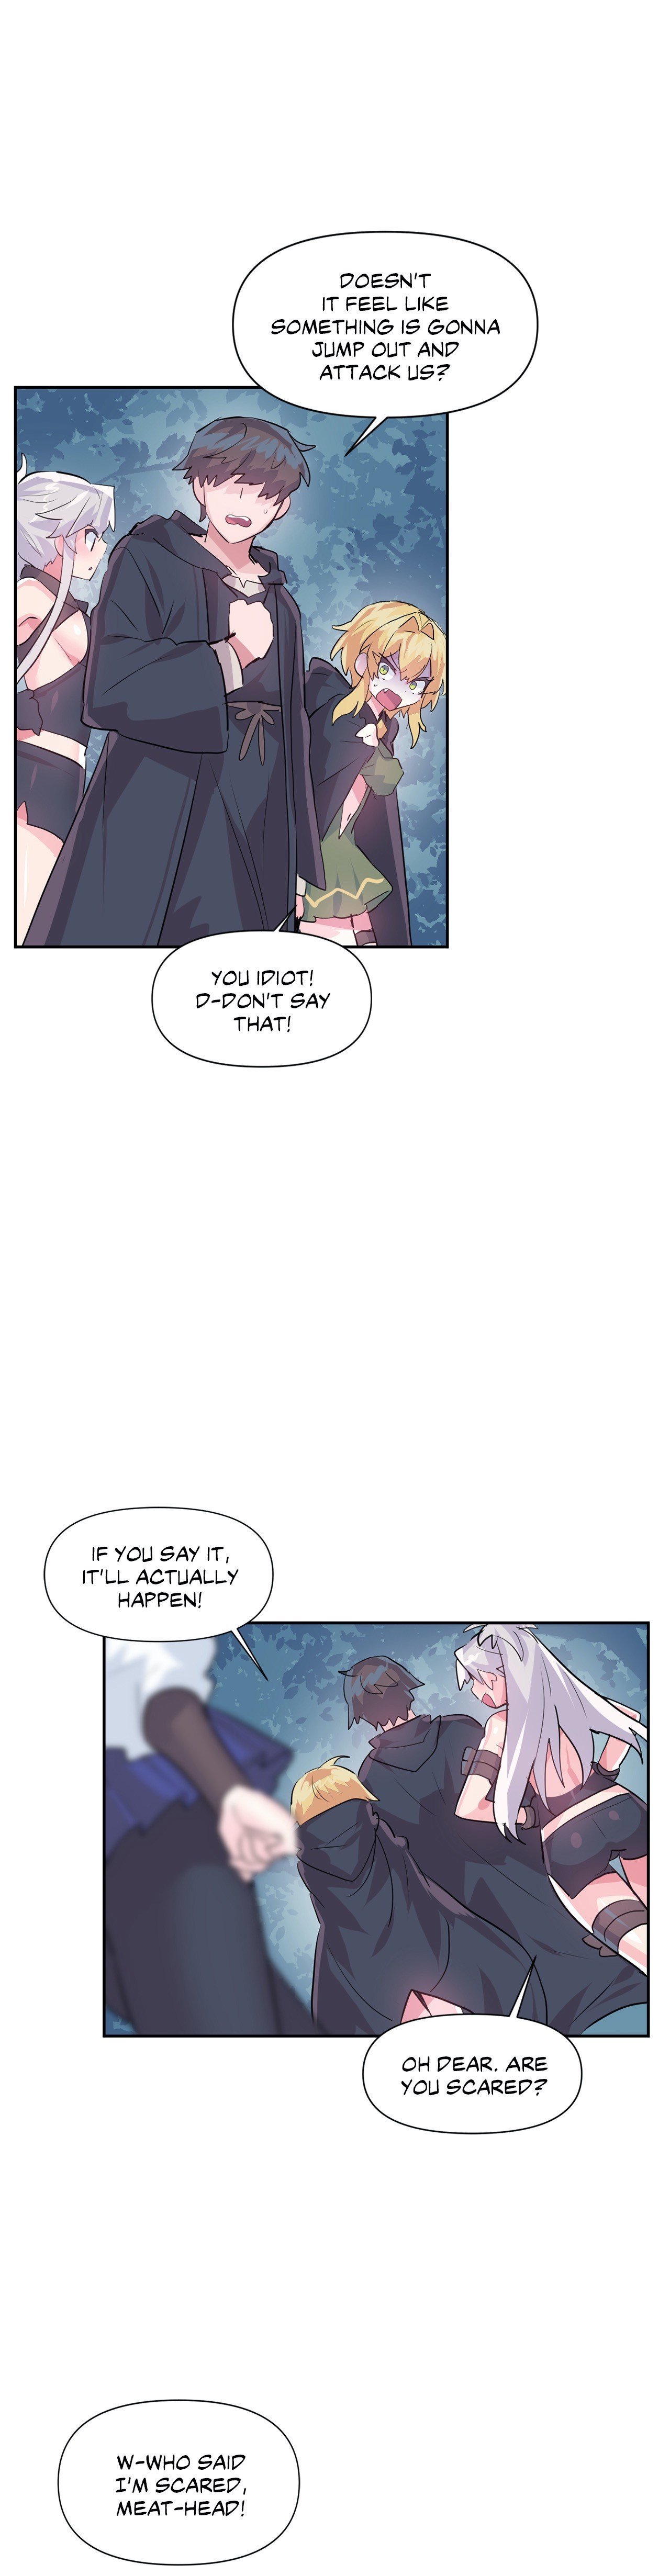 log-in-to-lust-a-land-chap-34-6